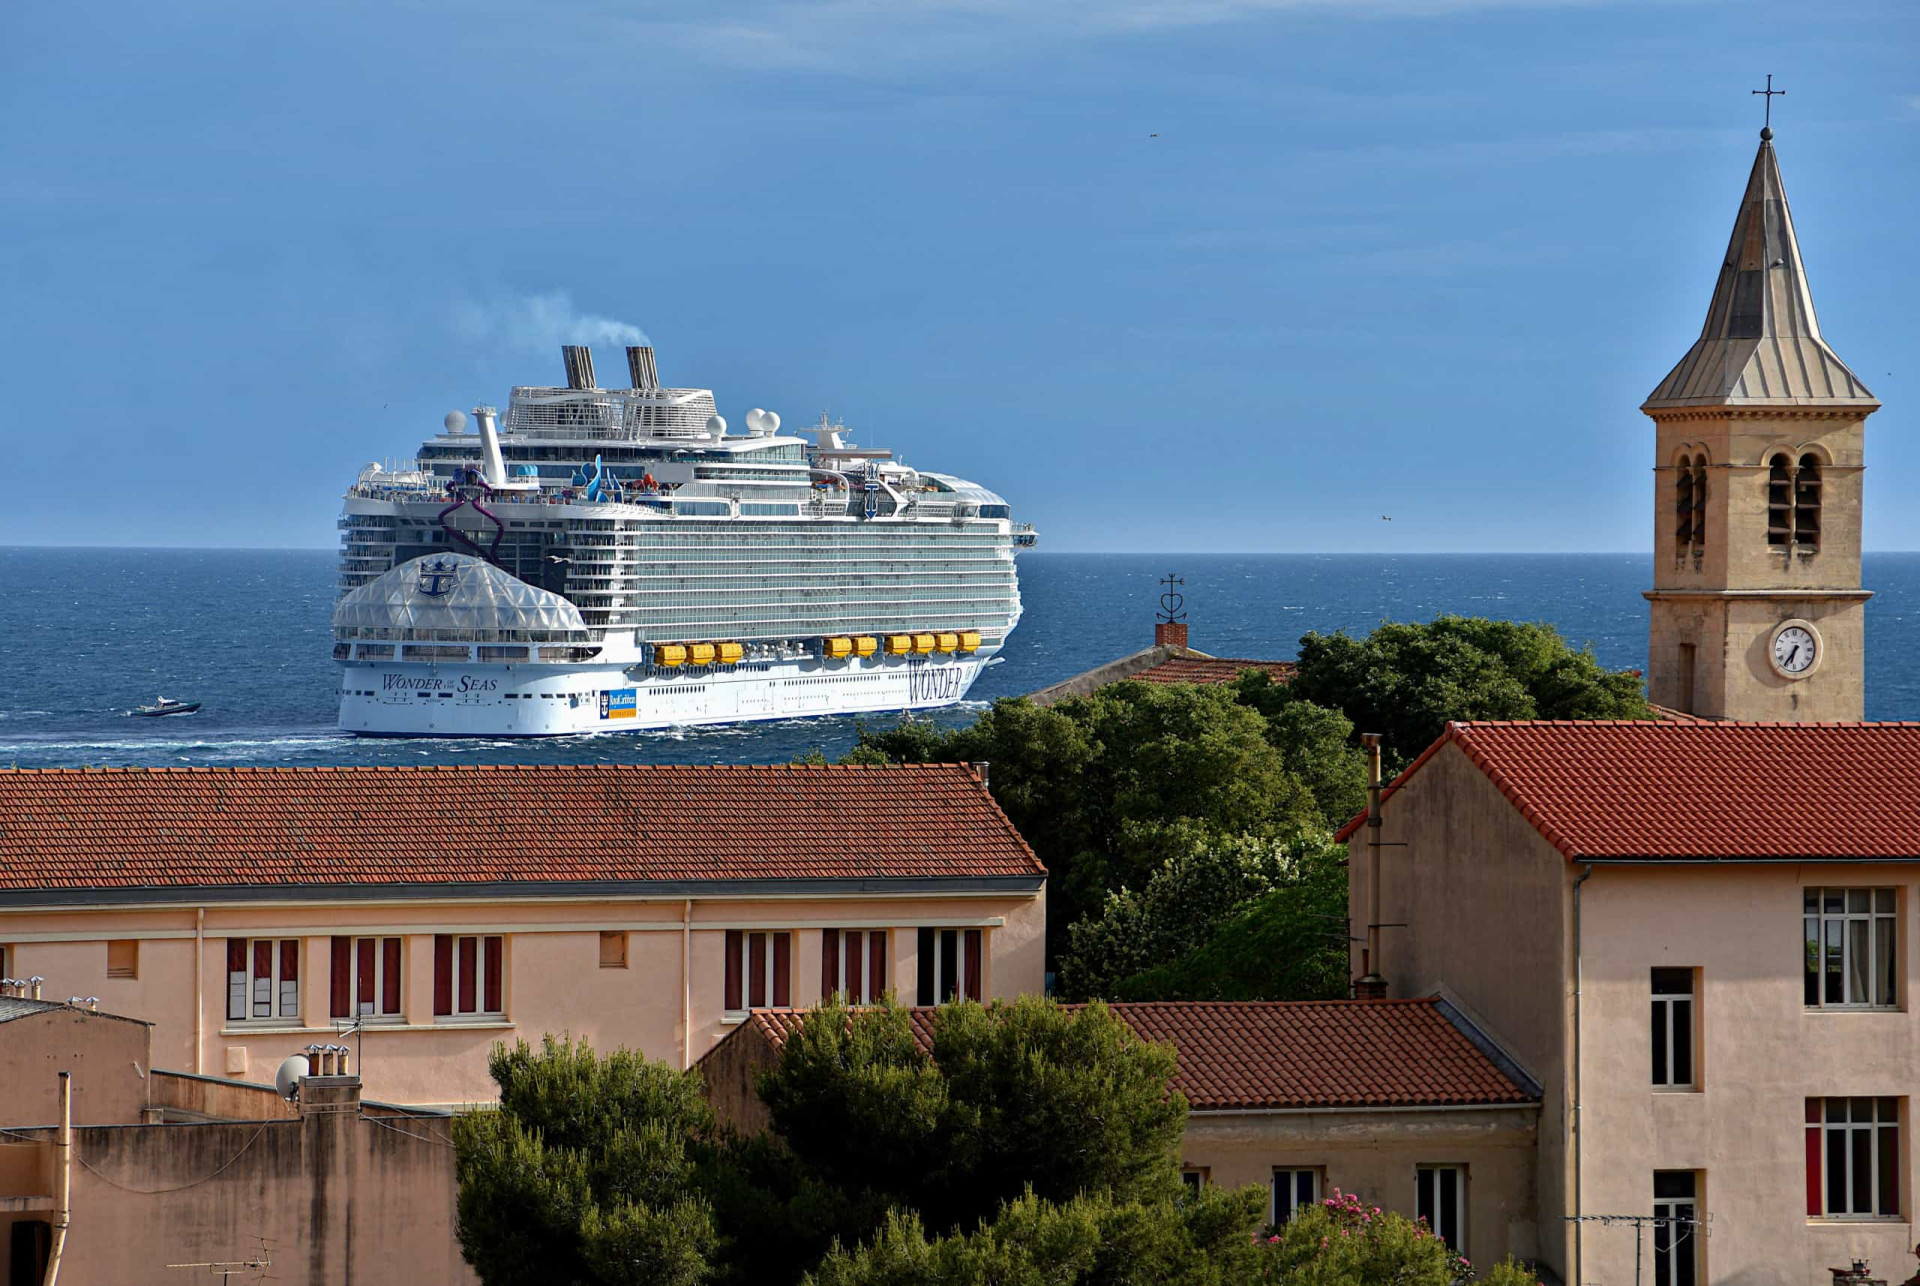 <p>Currently, the largest cruise ship in the world is <em>Wonder of the Seas</em> (pictured in May 2022 leaving Marseilles). This vast floating hotel can accommodate 6,988 passengers. Operated by Royal Caribbean International, the vessel is longer than the largest military ships ever built, the US <em>Nimitz</em>-class aircraft carriers.</p> <p>Sources: (Cruise Market Watch) (Cruise Dialysis) (Smithsonian Magazine) (History) (The Maritime Executive) (Forbes)</p> <p>See also: <a href="https://www.starsinsider.com/lifestyle/402795/10000-eggs-per-day-and-other-crazy-cruise-ship-food-stats">10,000 eggs a day and other crazy cruise ship food stats</a></p>